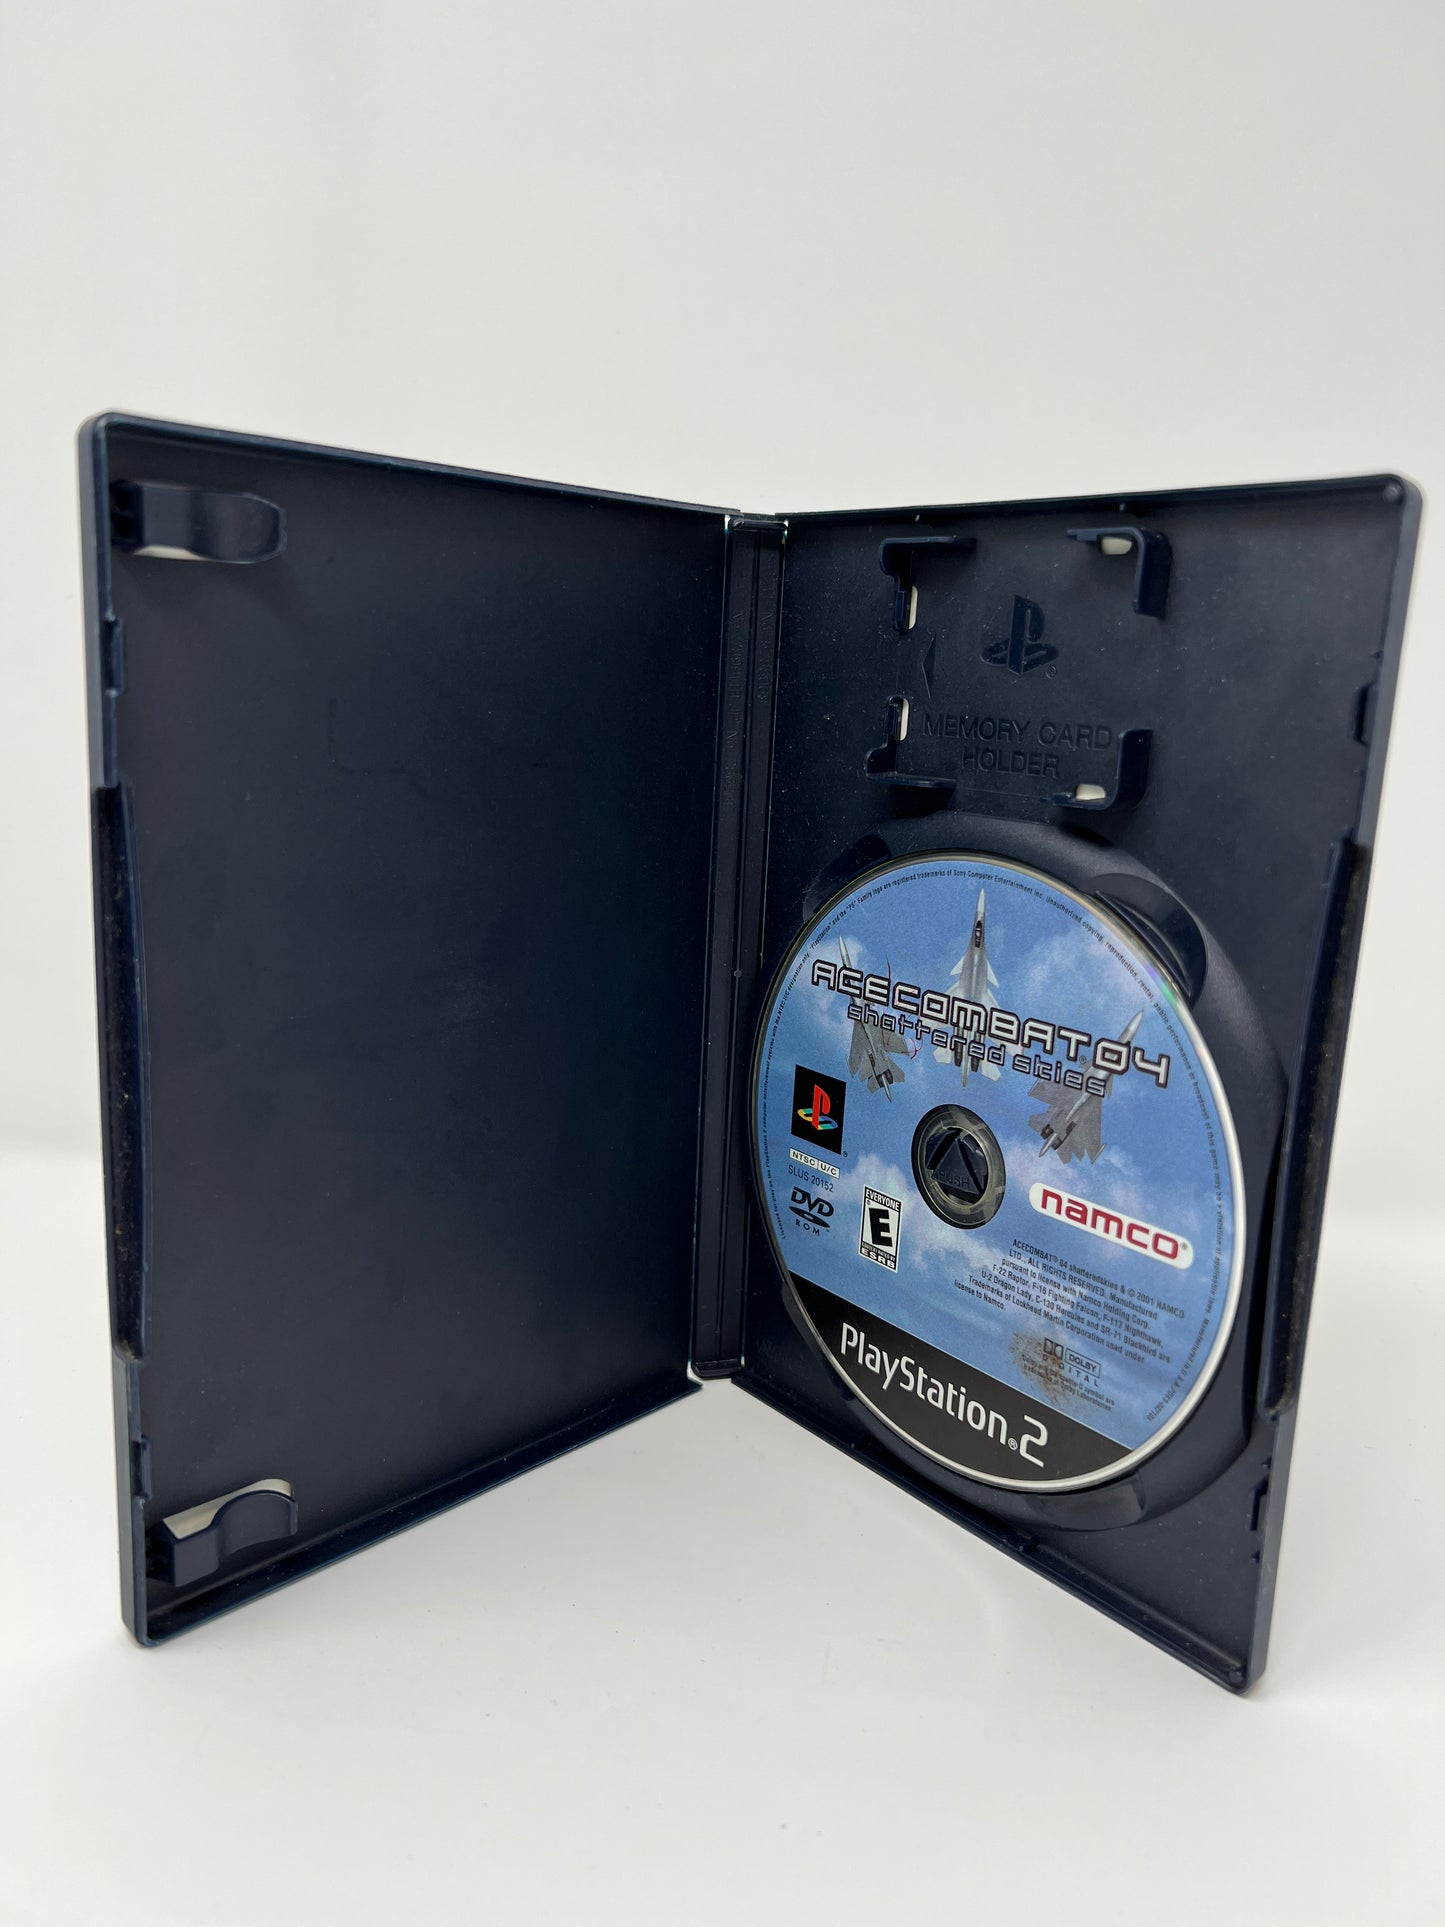 Ace Combat 04 Shattered Skies - PS2 Game - Used